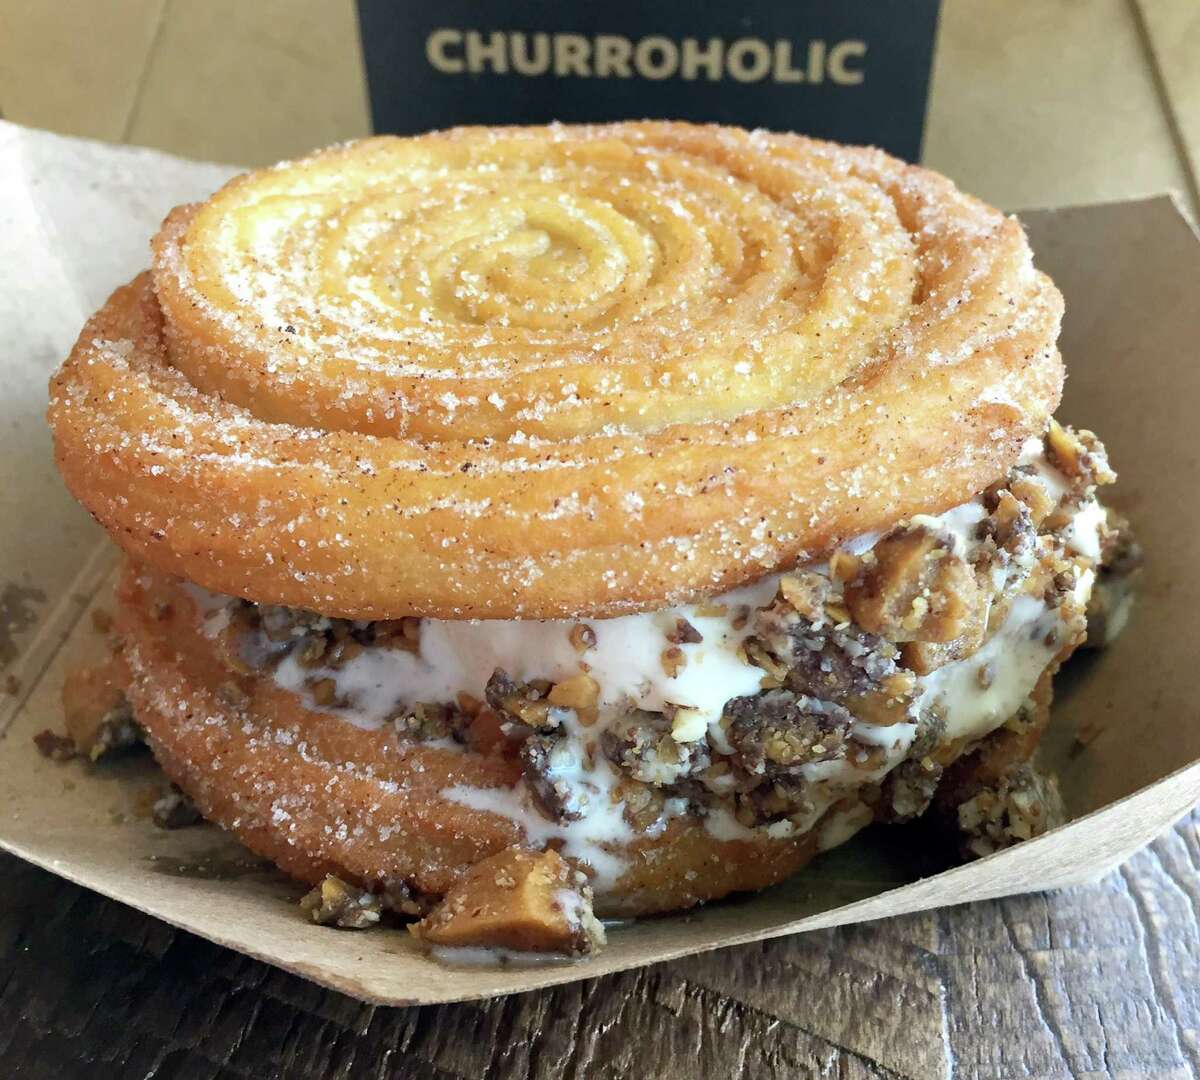 A Churro Sandwich made with horchata ice cream and toffee crumbles from Churroholic.